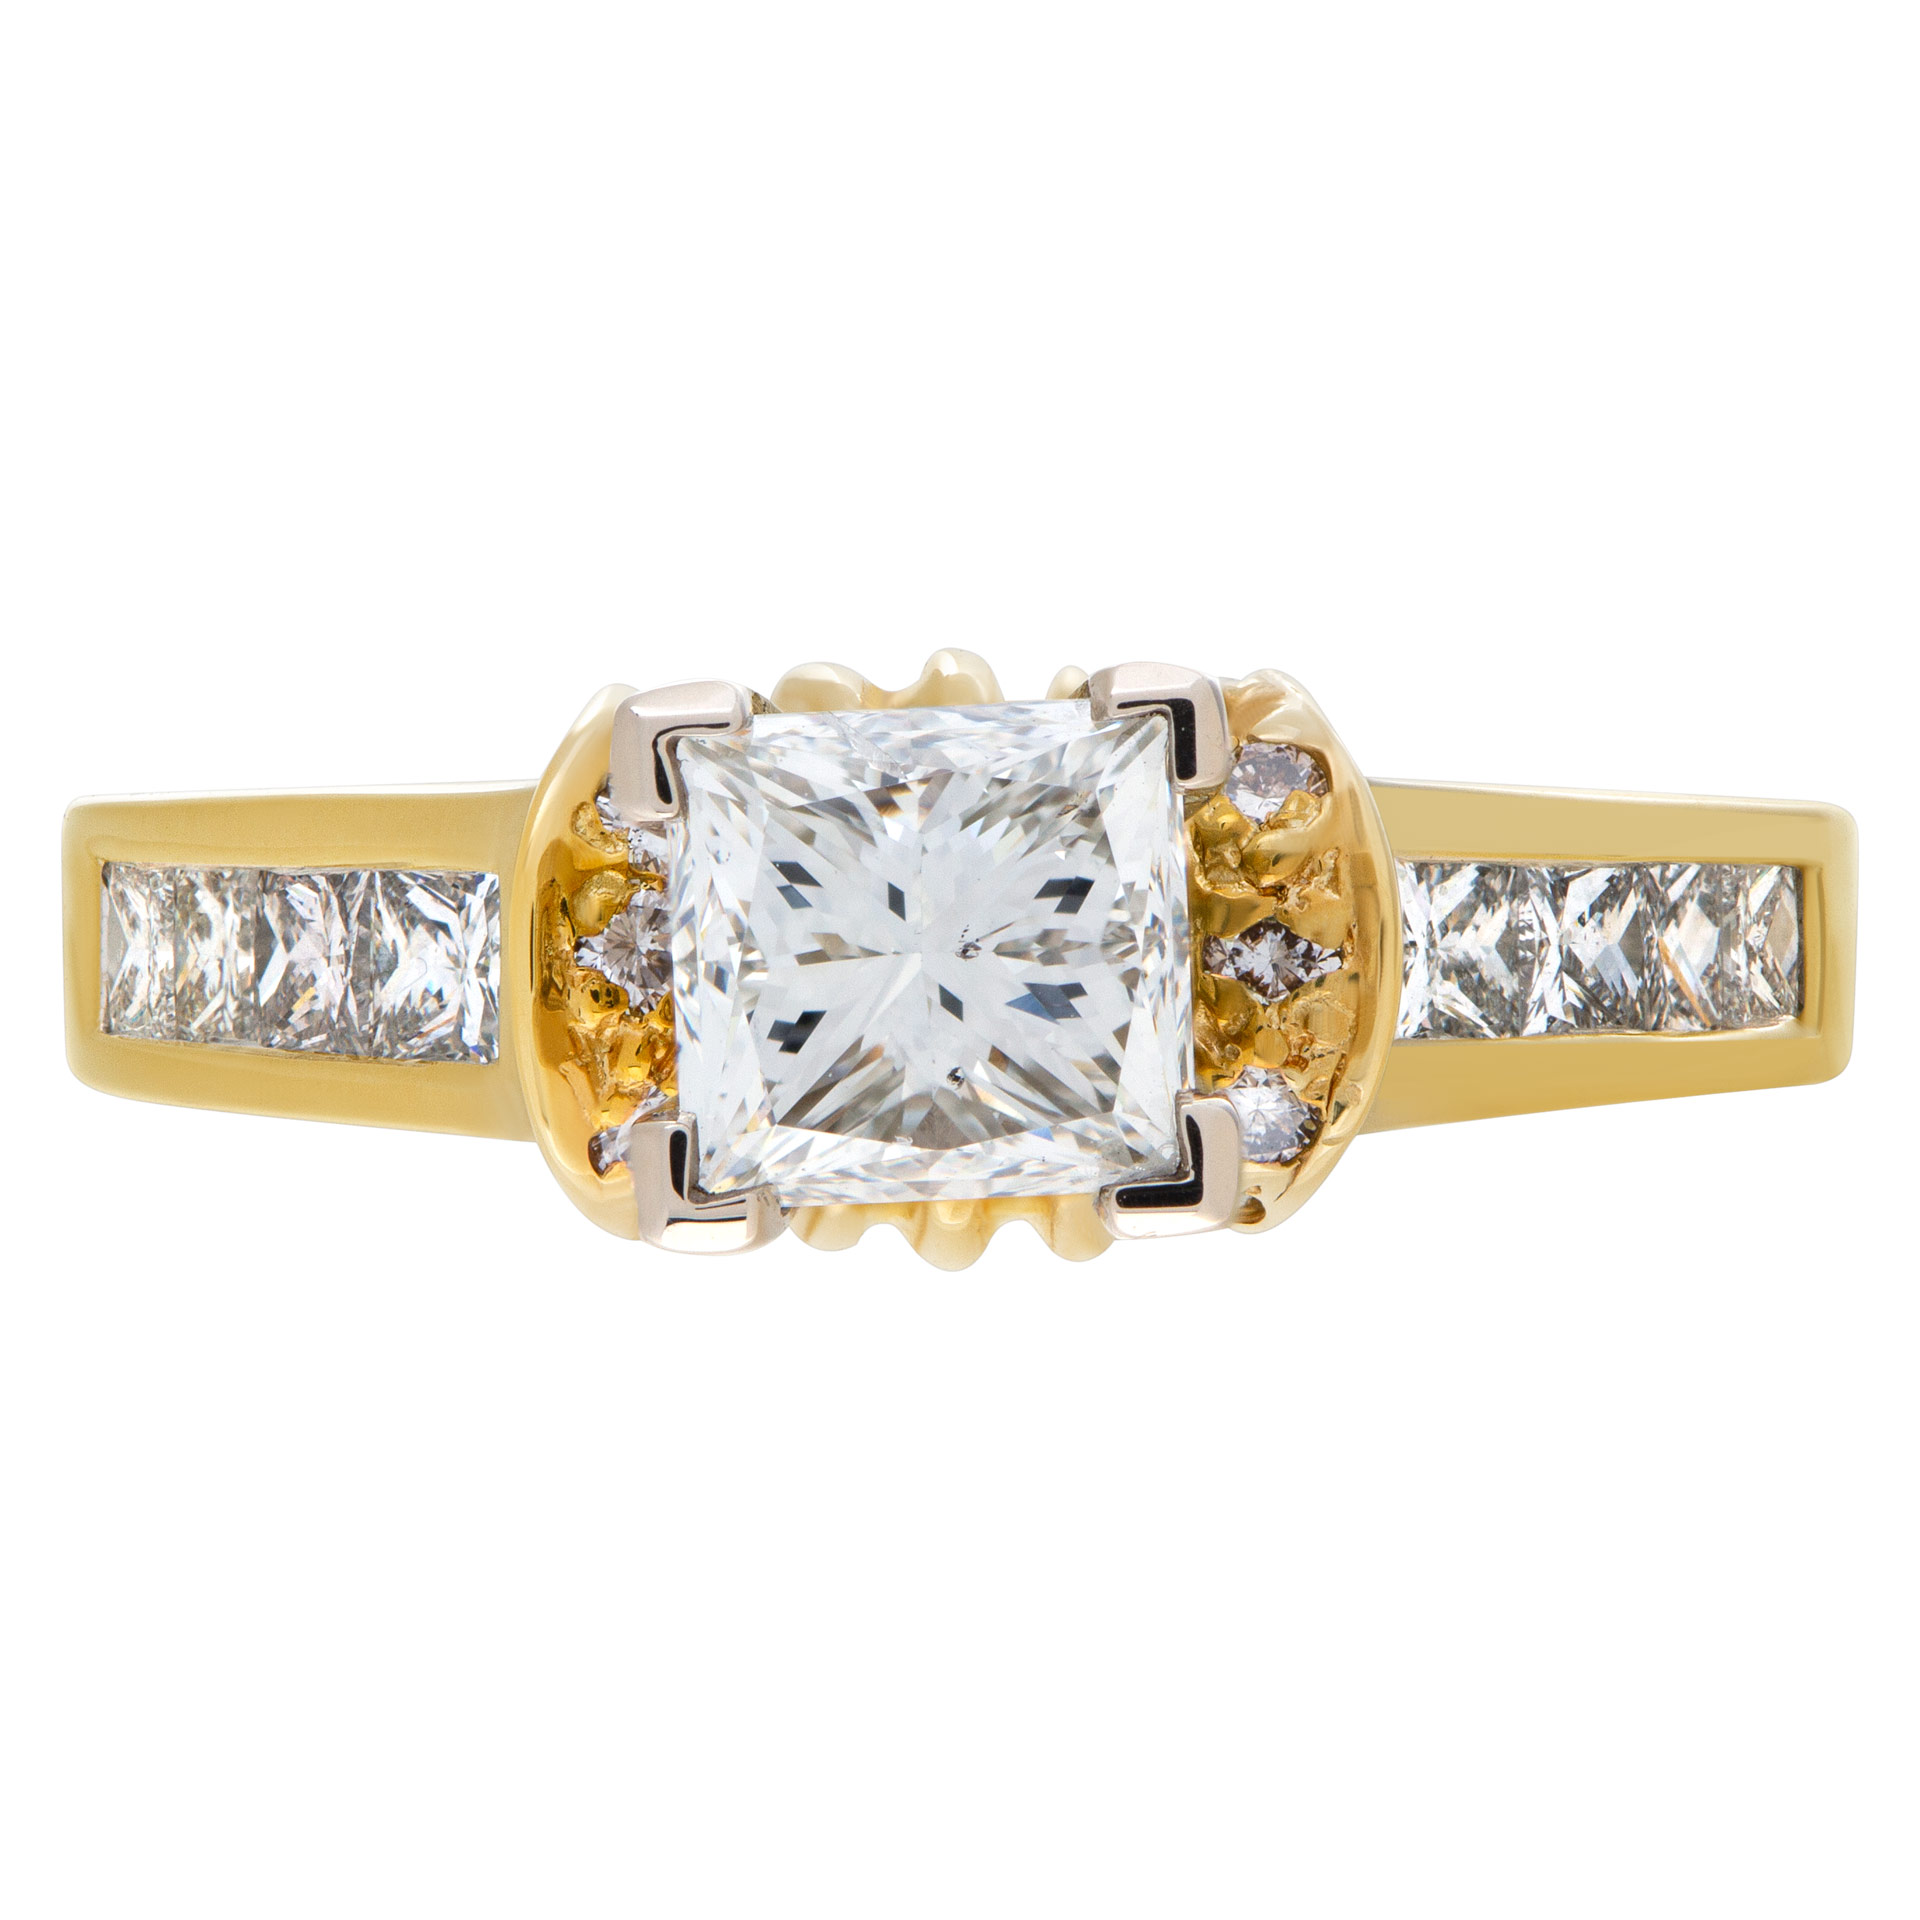 GIA Certified Square Modified Brilliant Diamond 1.28cts (I Color SI2 Clarity) ring set in 14k yellow and white gold . Size 6.75 image 2